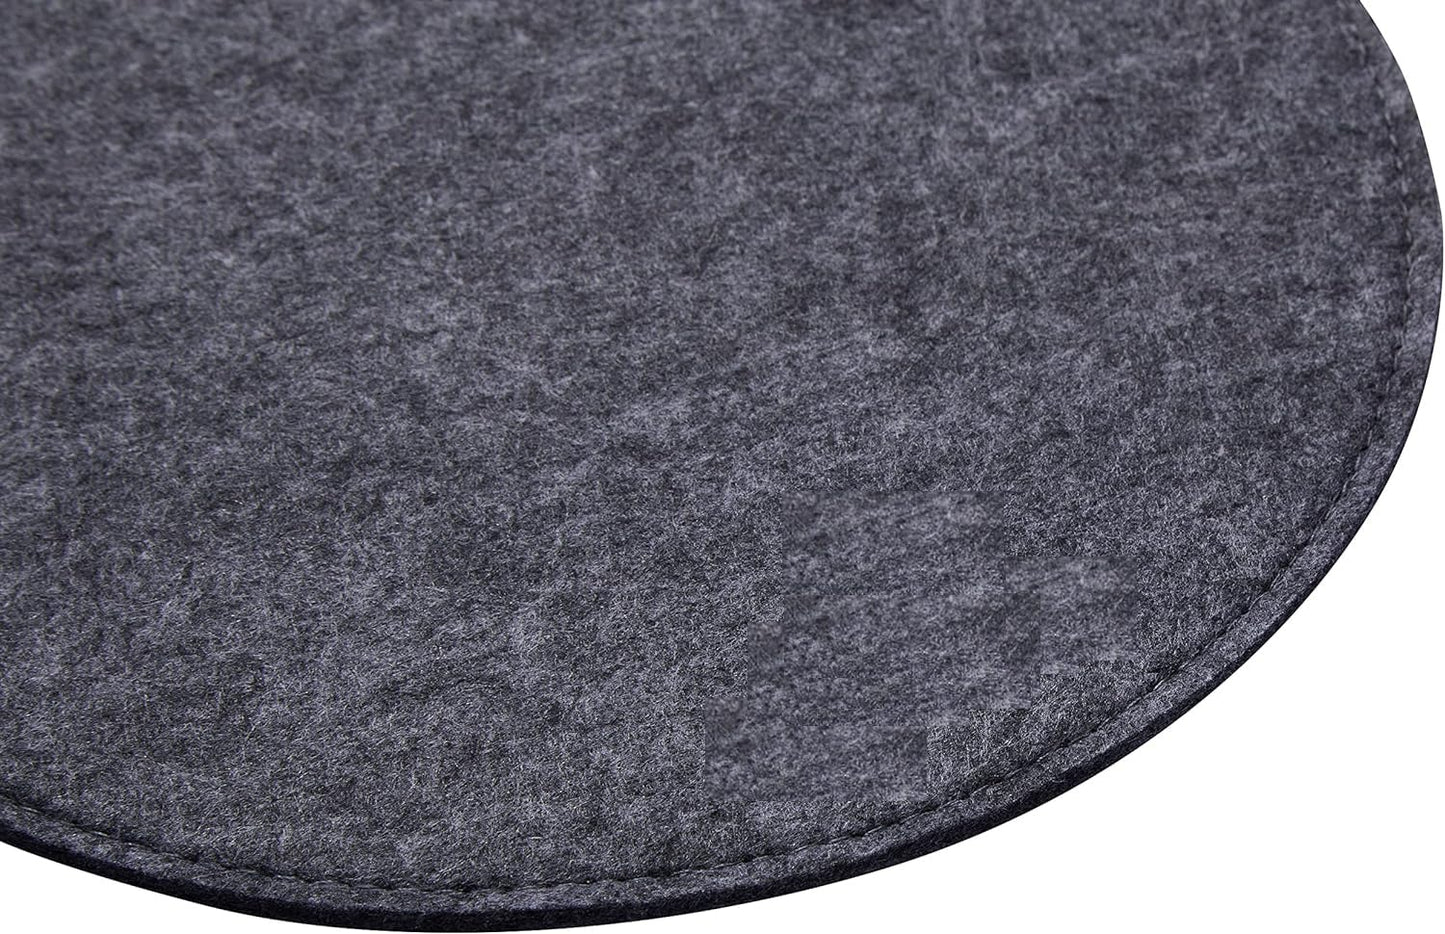 Tierno Round Shape Mouse Pad | Extended for Laptop, PC and Wireless Mouse | Large Vegan Leather Finish for Home, Office, Gaming in Black Felt Pack of 1